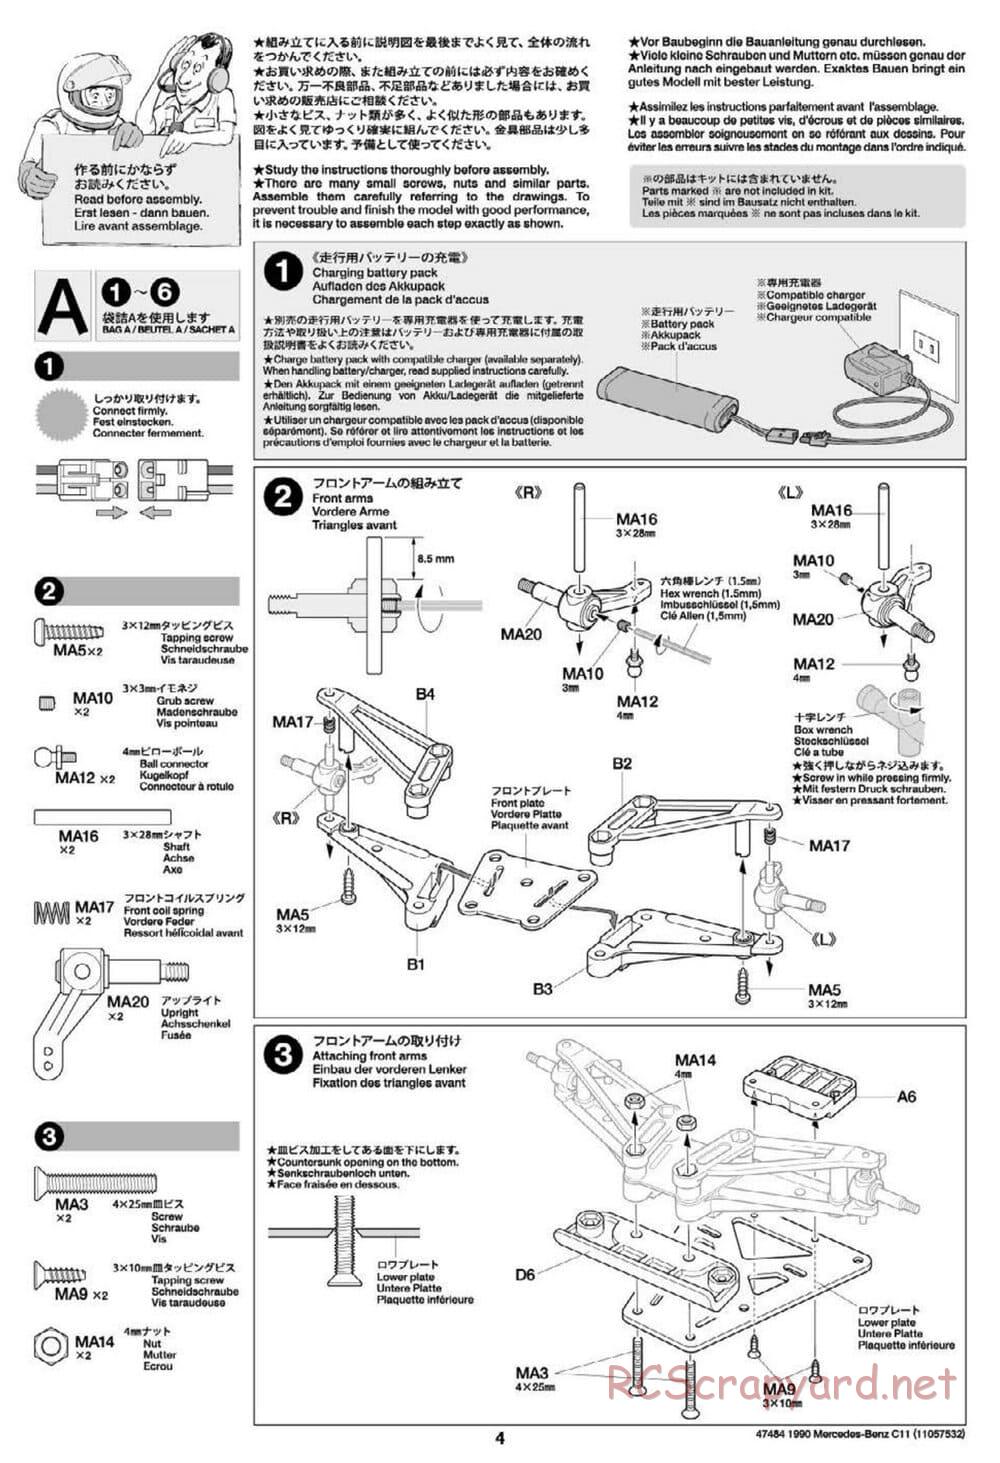 Tamiya - 1990 Mercedes-Benz C11 - Group-C Chassis - Manual - Page 4